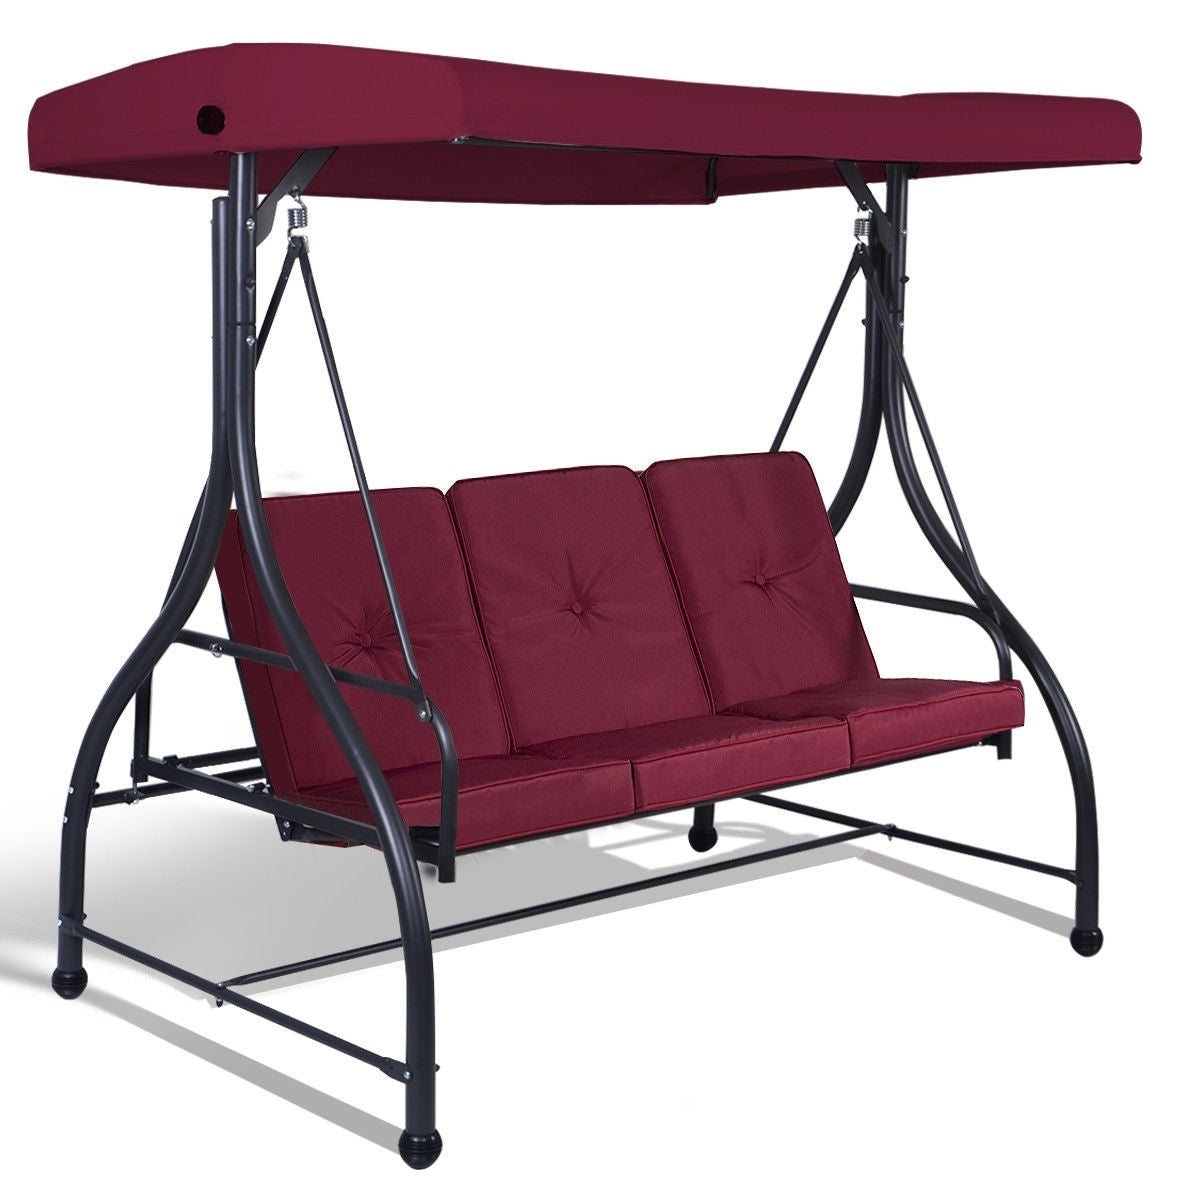 Red Burgundy Wine 3 Seat Cushioned Porch Patio Canopy Swing Chair